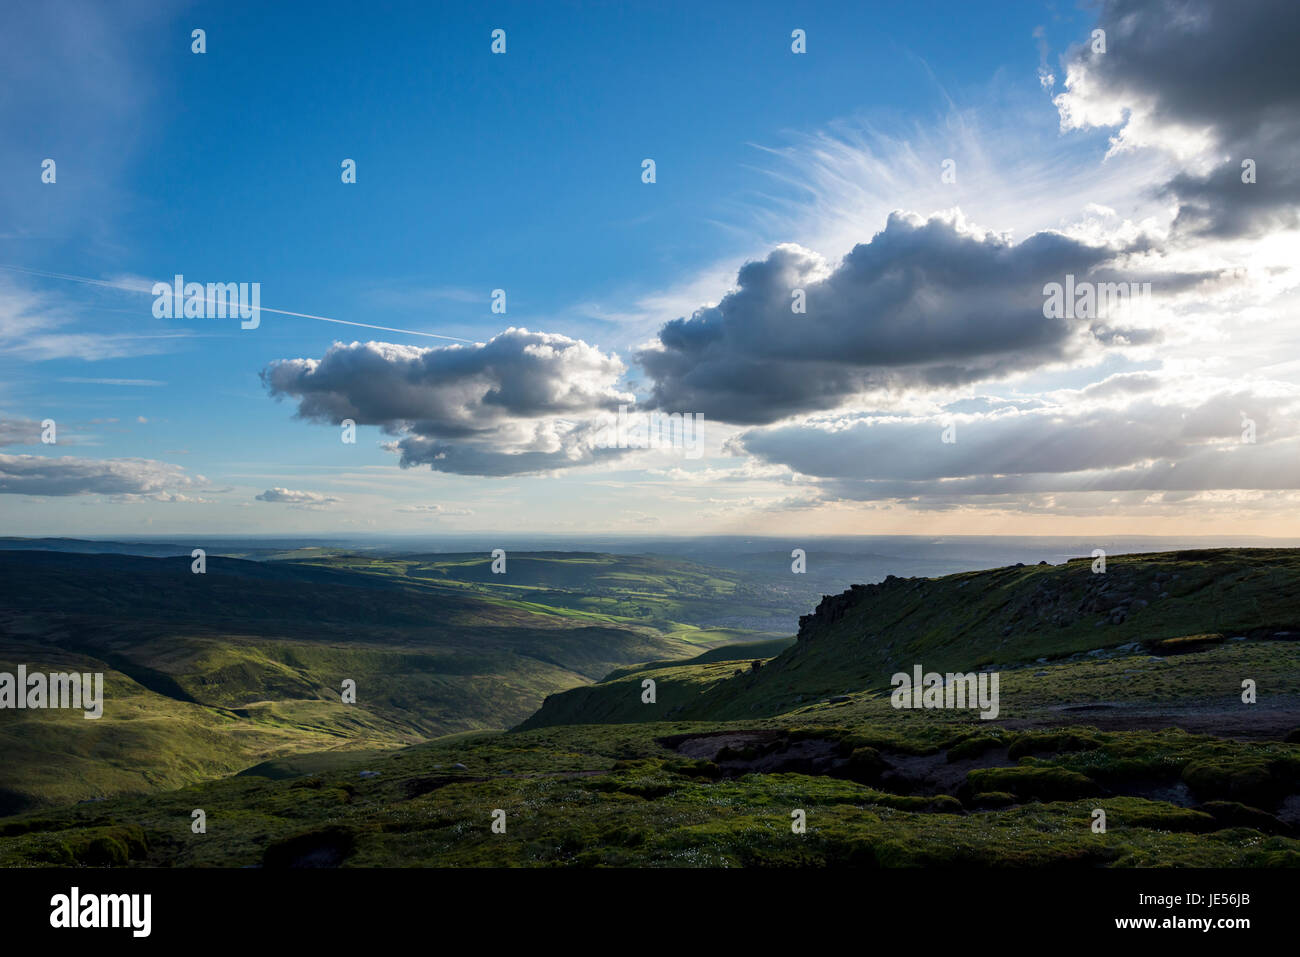 Big sky over the hills of Glossop in North Derbyshire. Manchester in the far distance. Stock Photo